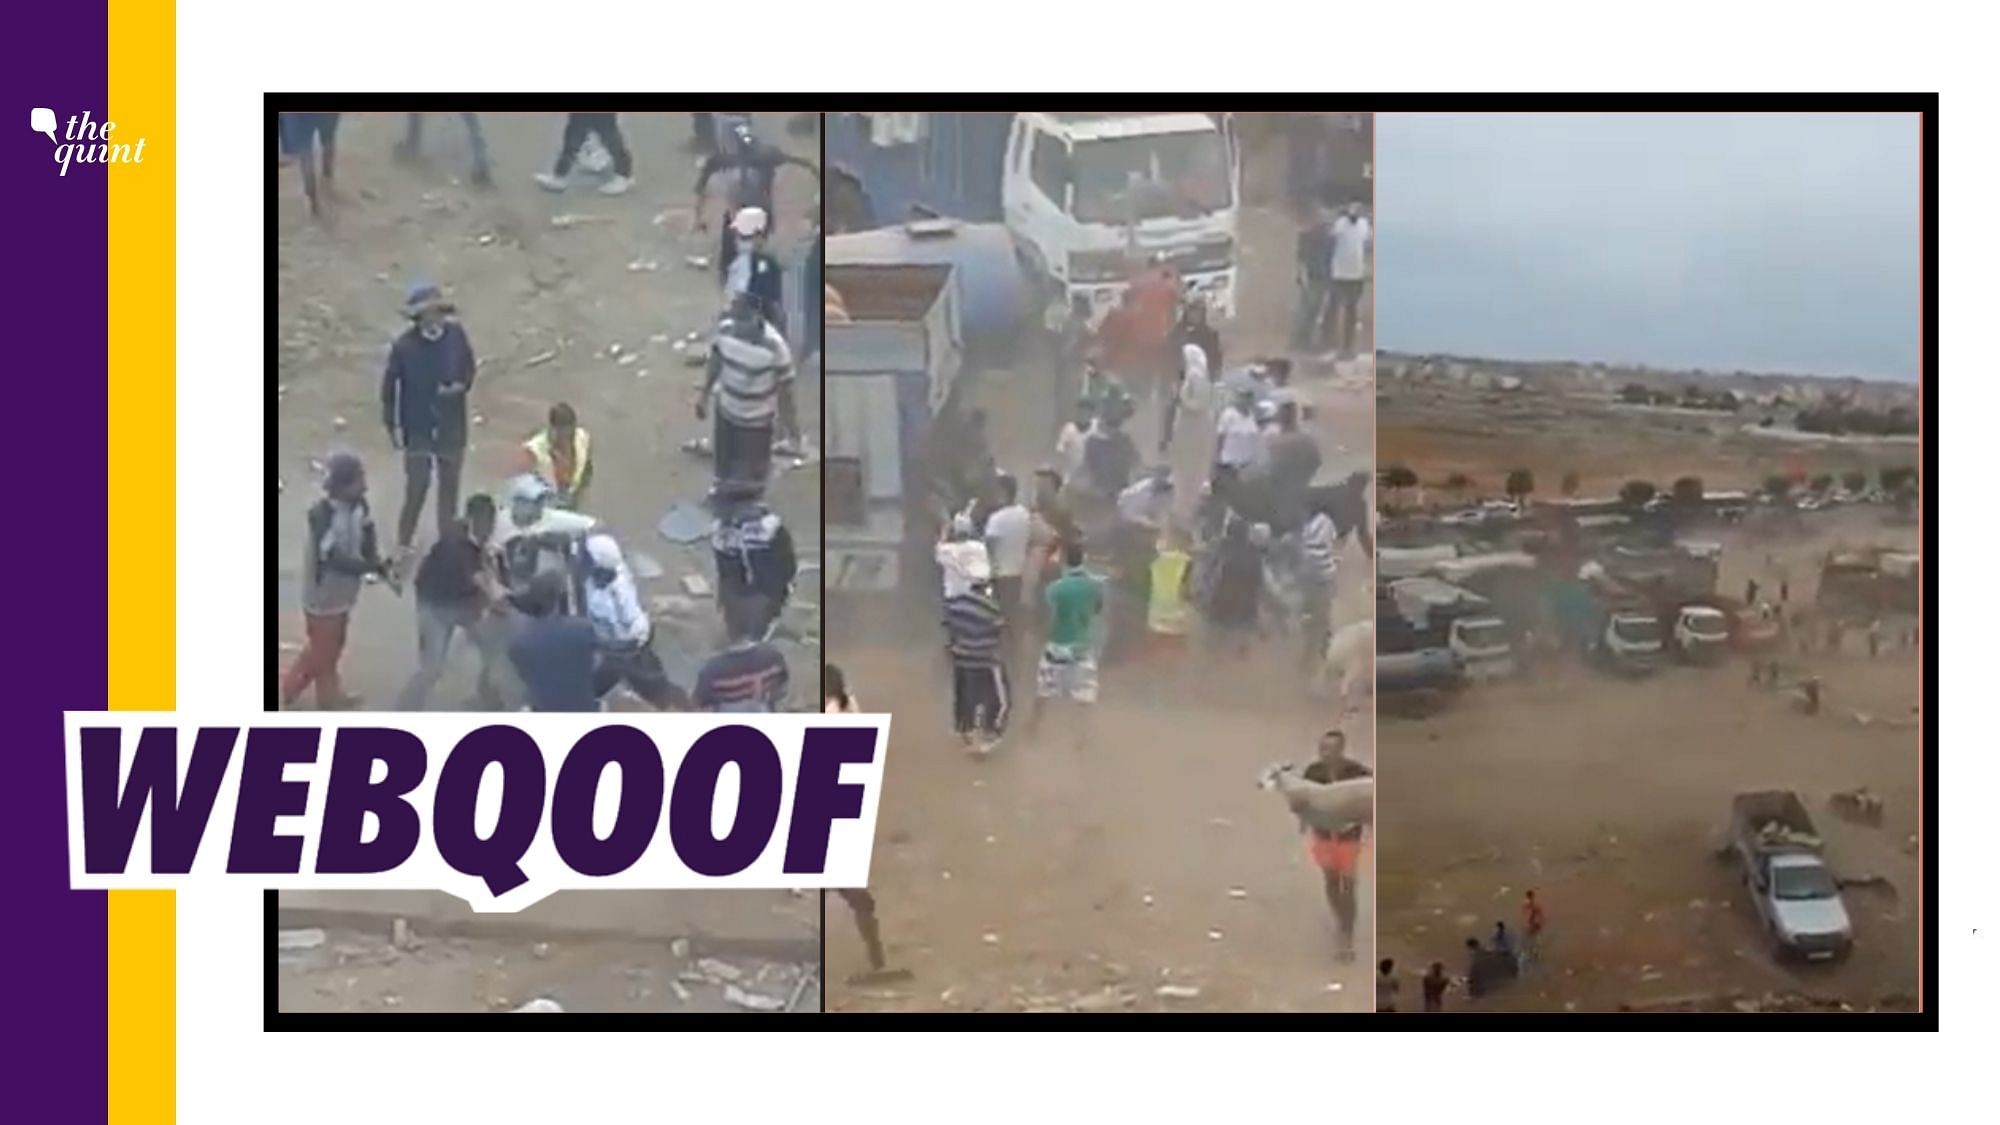 A video showing loot and violence at a sheep-goat market has gone viral on social media.